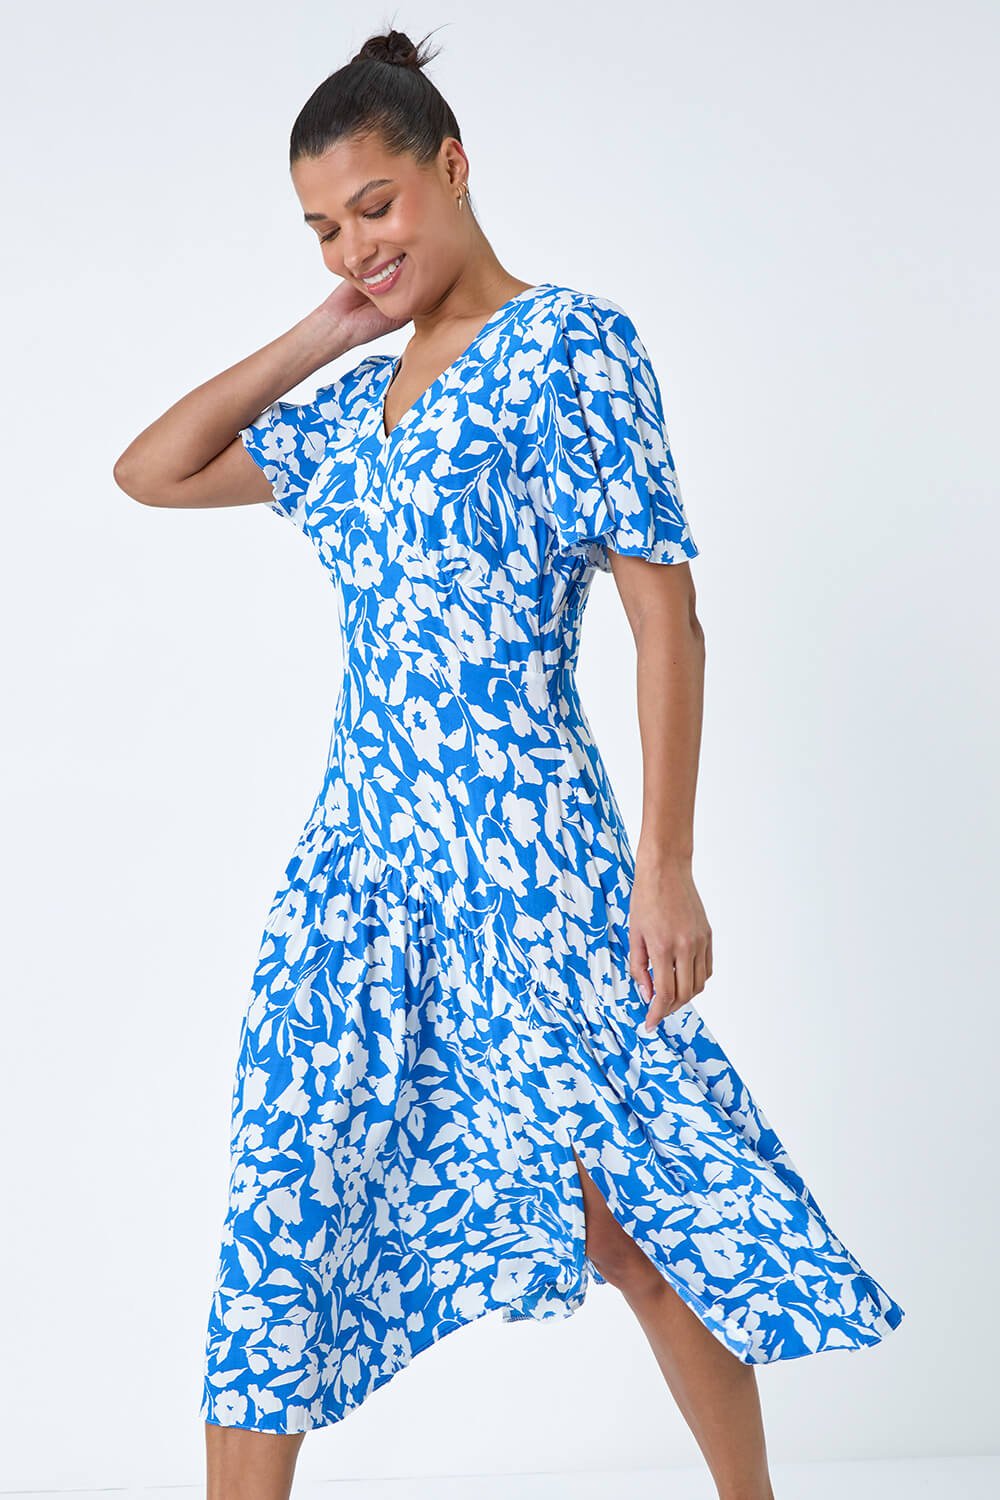 Blue Tiered Contrast Floral Print Dress, Image 4 of 5